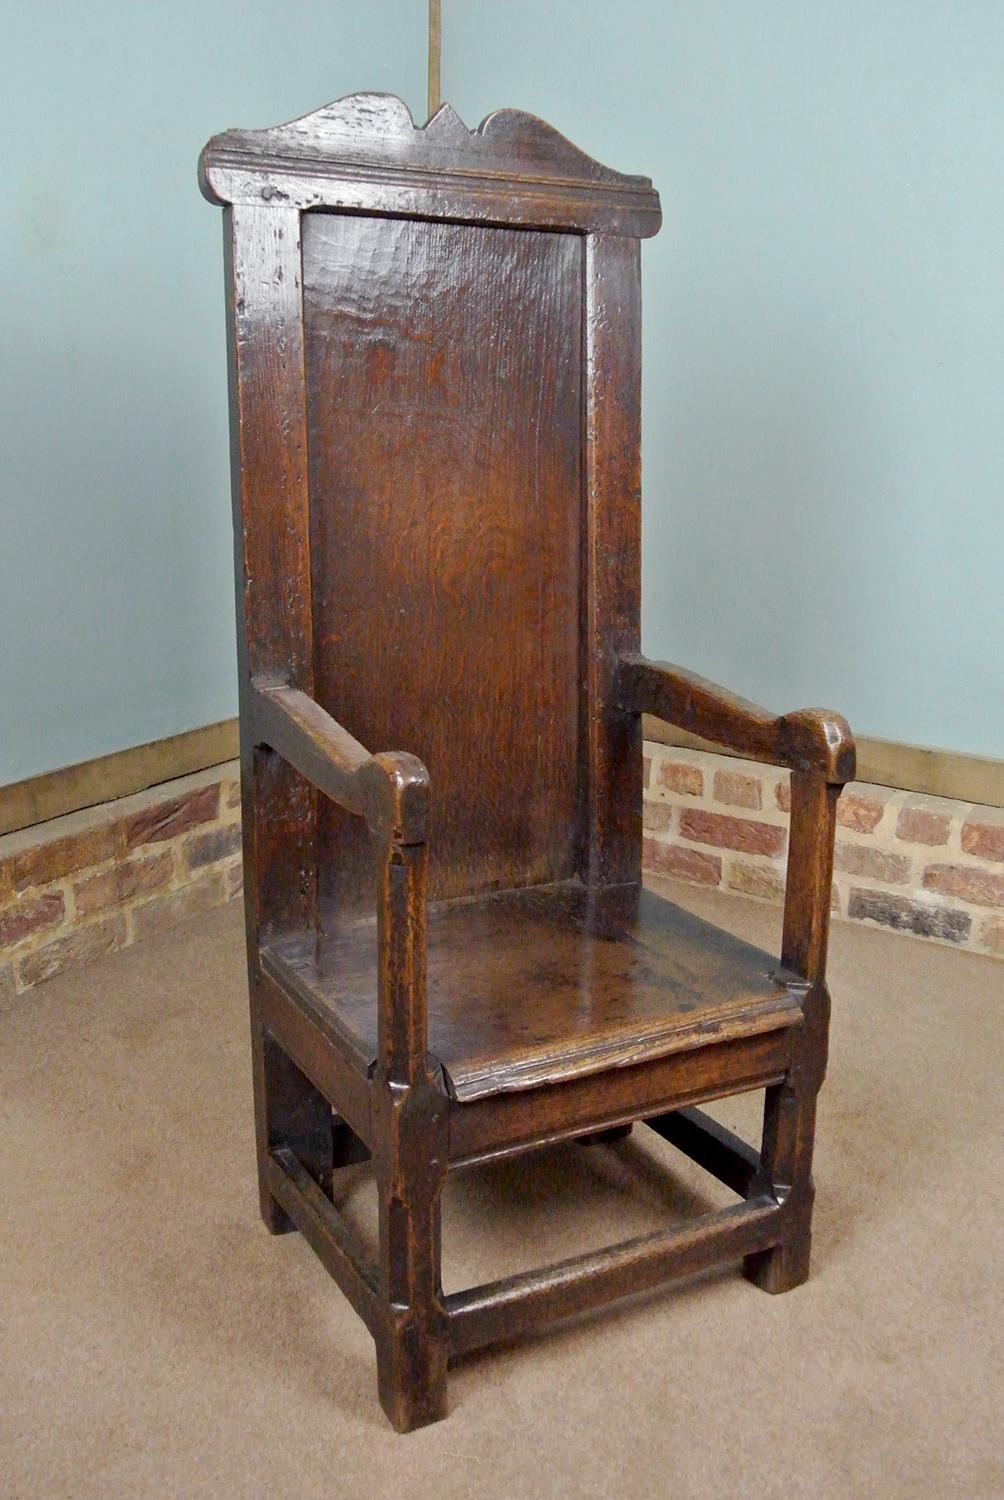 A very early and rare oak wainscot chair with a tall back and beautifully shaped crest. Peg jointed throughout. The arm supports and front legs are square sectioned with chamfered faces in the late 16th Century Elizabethan manner. 

Solid oak